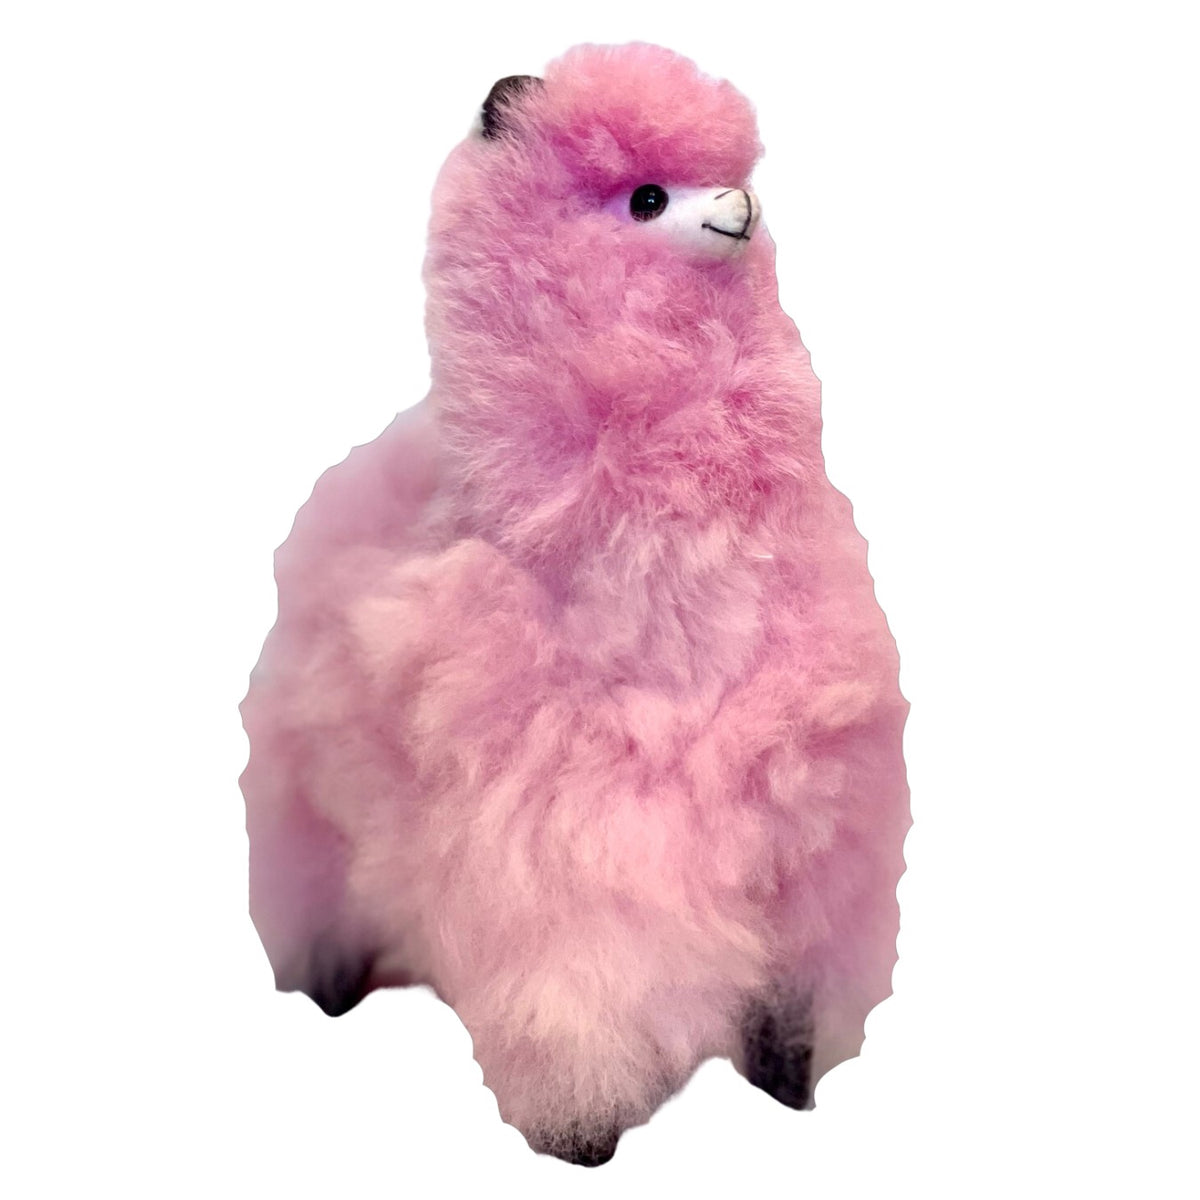 Product photo of a soft fluffy cute adorable pink plush alpaca wool figurine plushie.